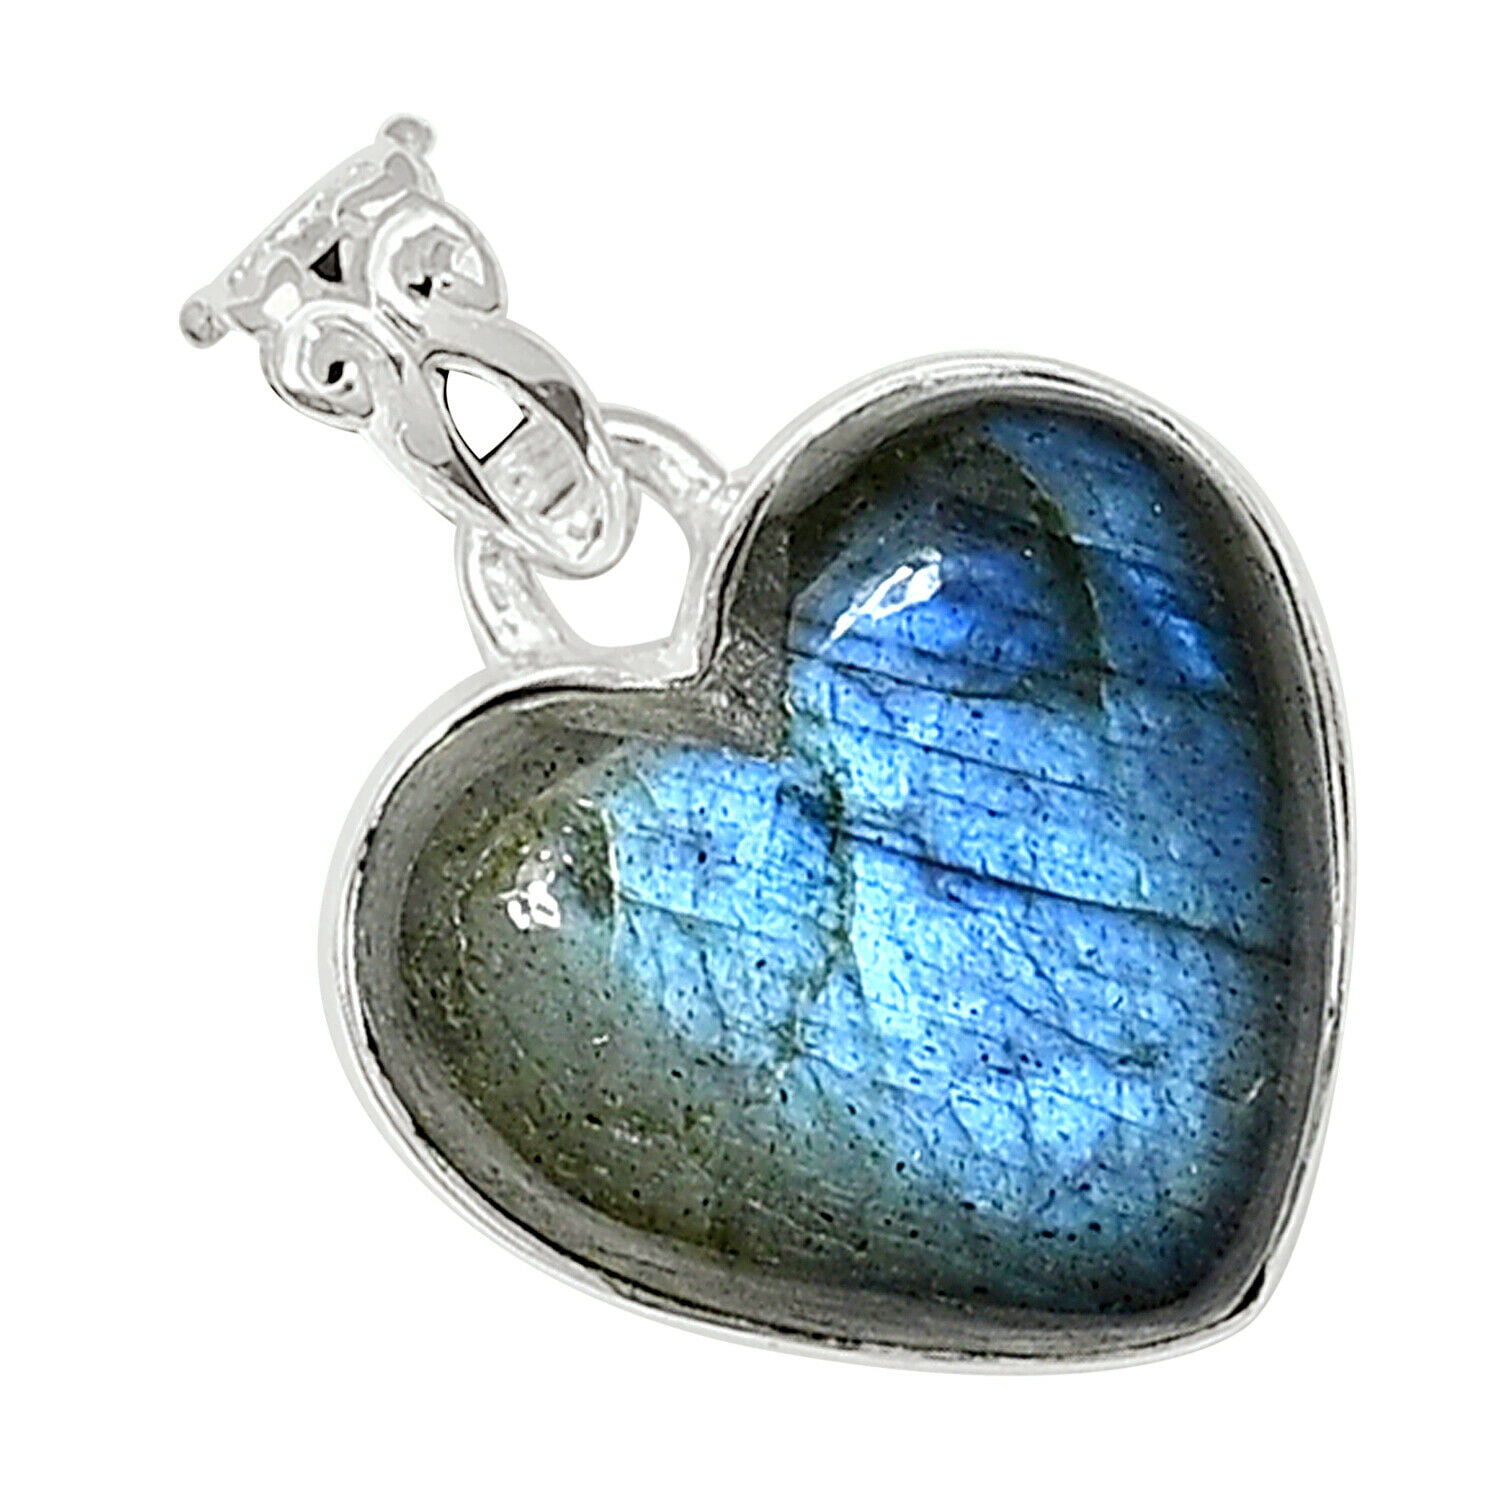 Solid 925 Sterling Silver Blue Love Heart Necklace